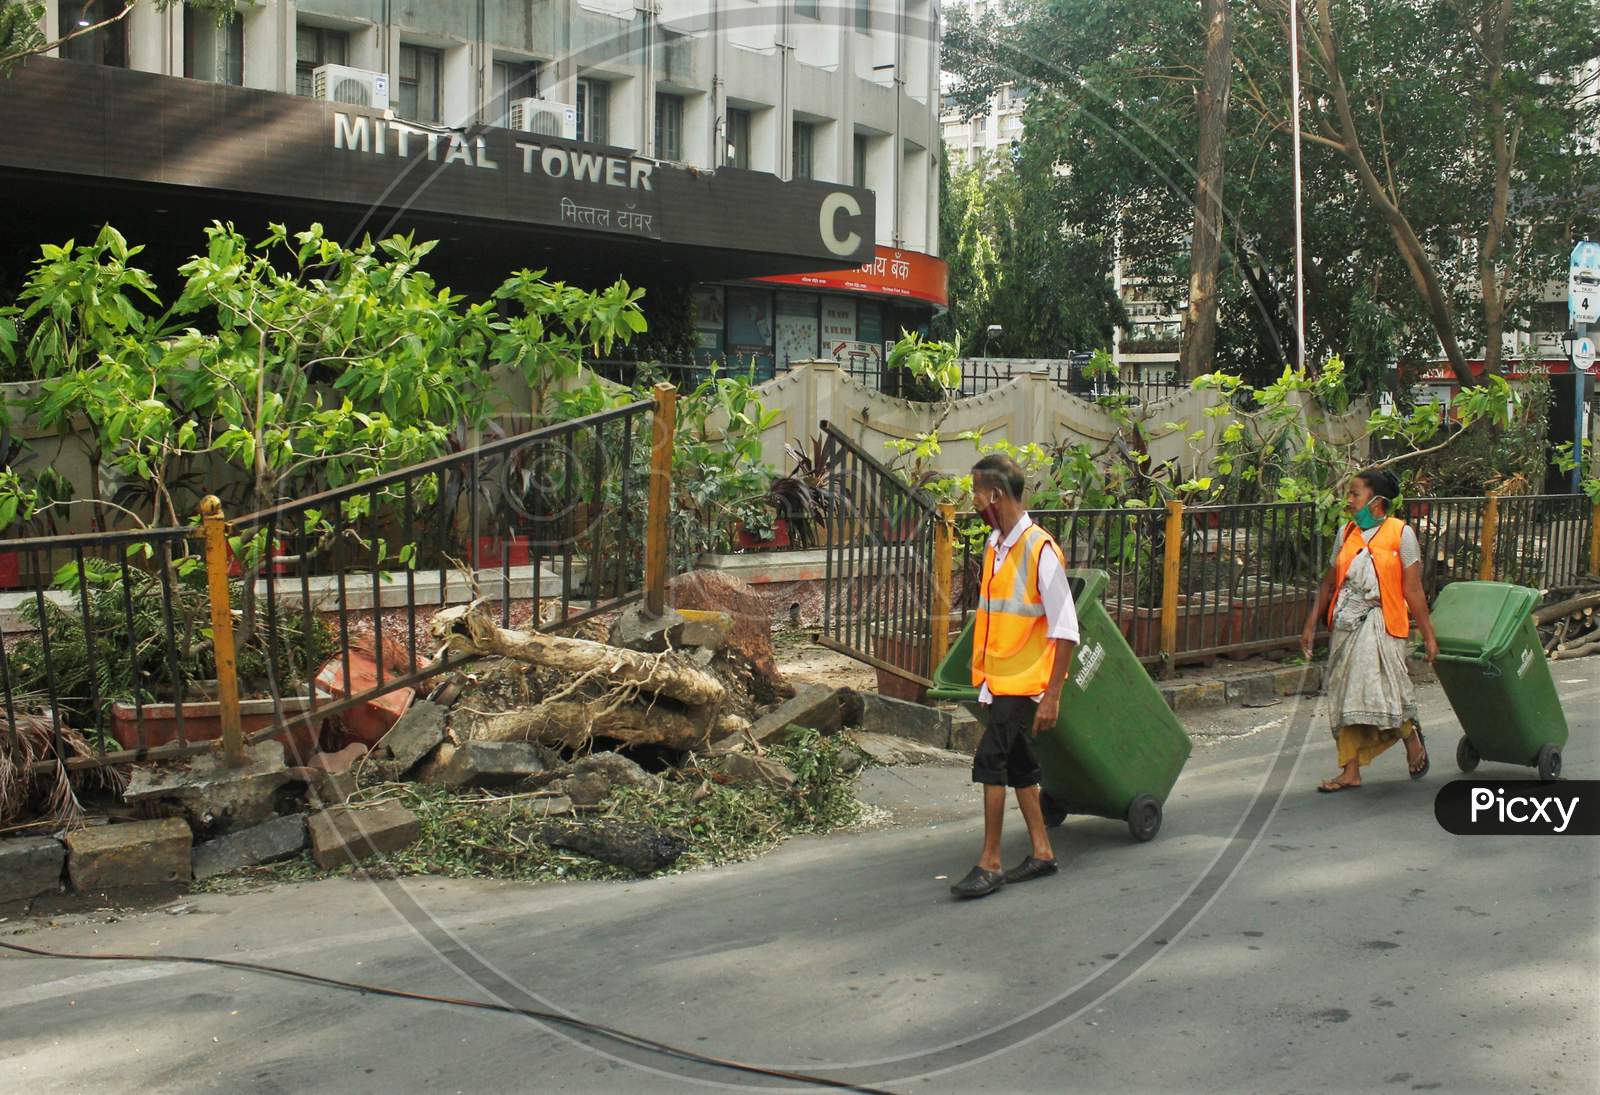 BMC workers walk past an uprooted pavement railing, after cyclone Nisarga made its landfall on June 3, on the outskirts of the city, in Mumbai, India, June 5, 2020.